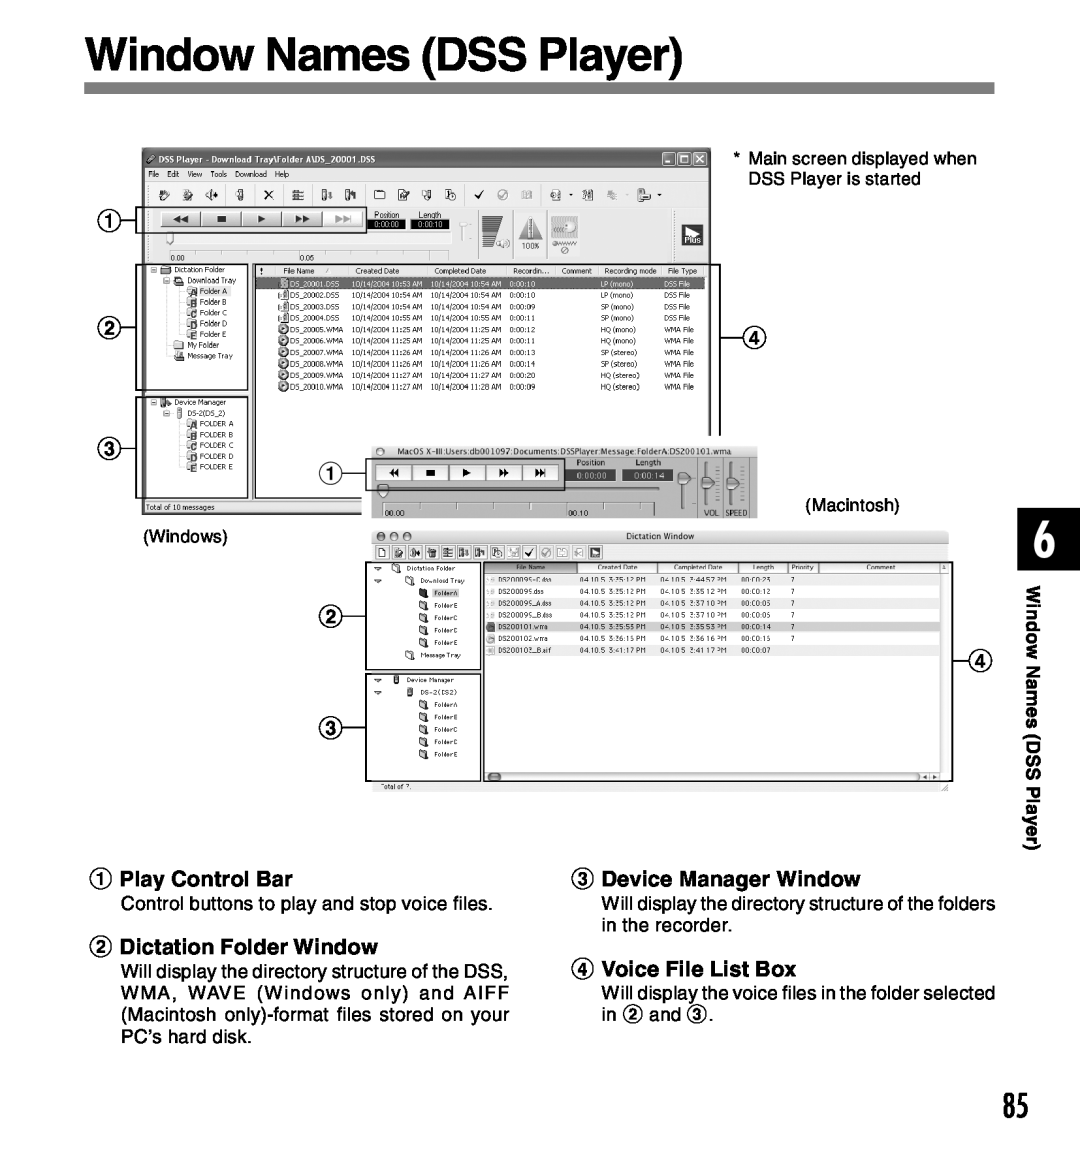 Olympus 2 Window Names DSS Player, Play Control Bar, Dictation Folder Window, Device Manager Window, Voice File List Box 